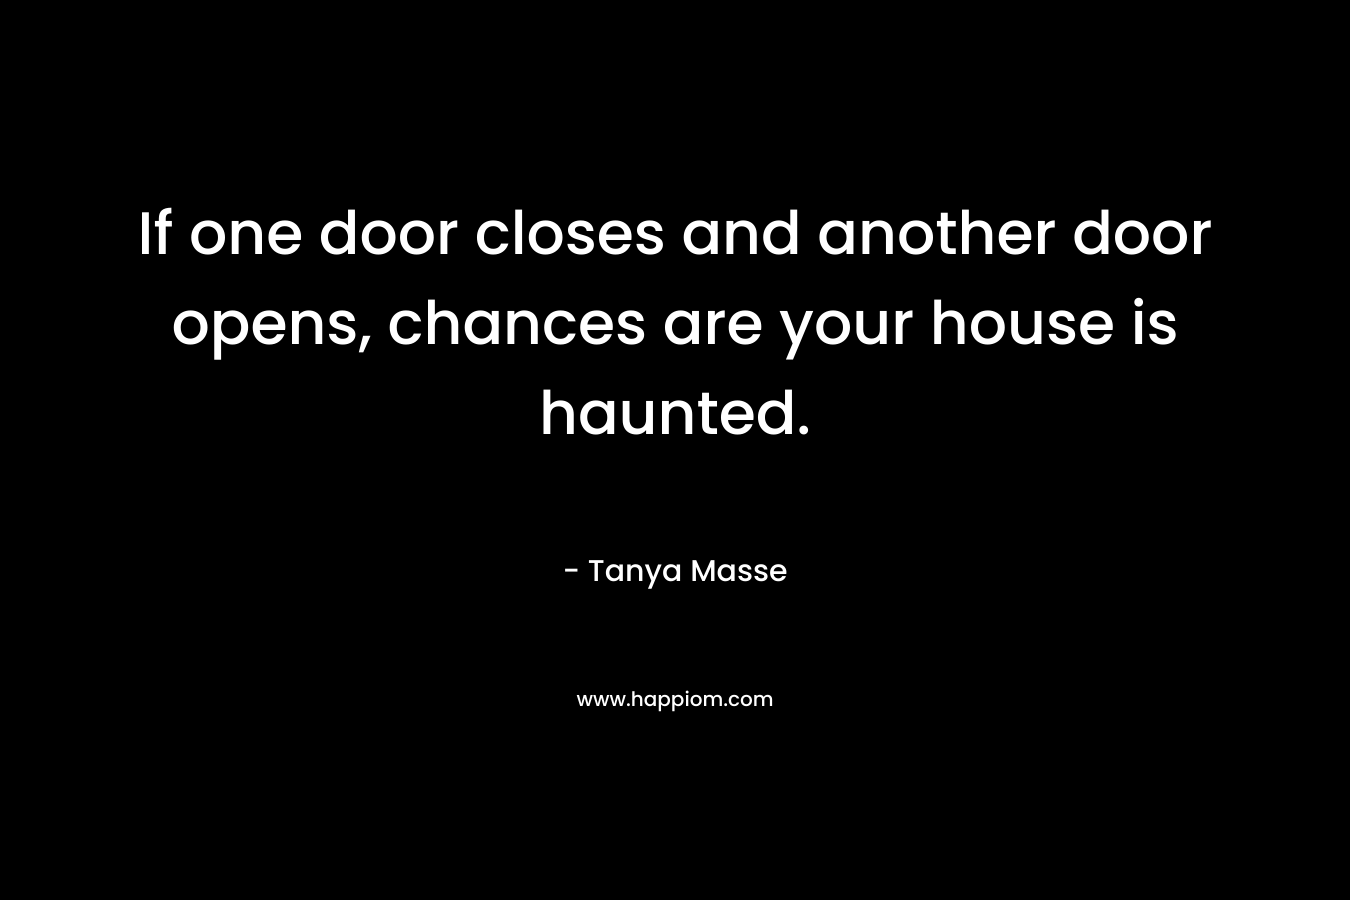 If one door closes and another door opens, chances are your house is haunted.